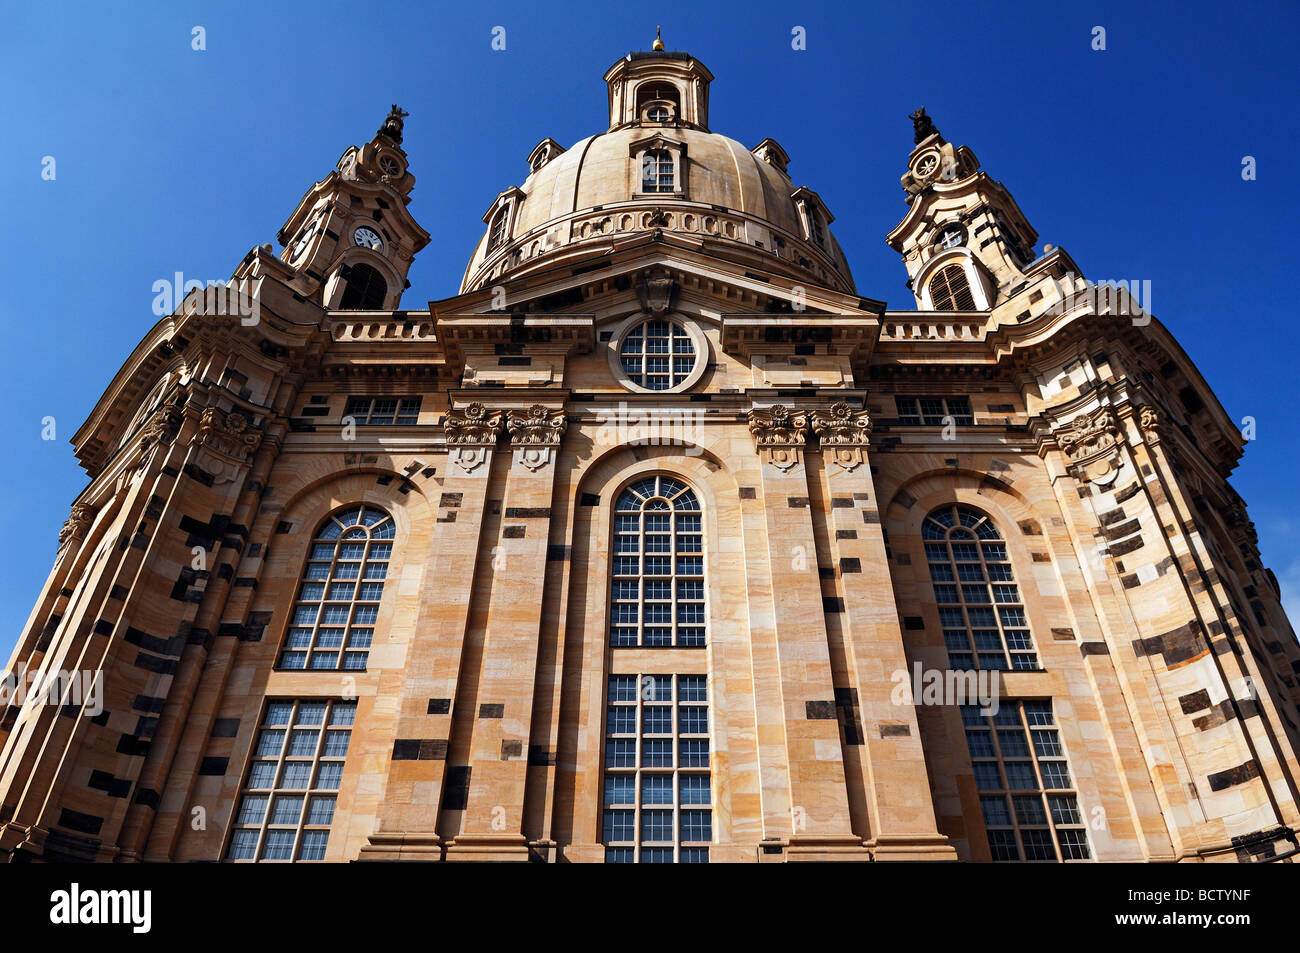 Frauenkirche, Church of Our Lady, against a blue sky at Neumarkt square, Dresden, Saxony, Germany, Europe Stock Photo